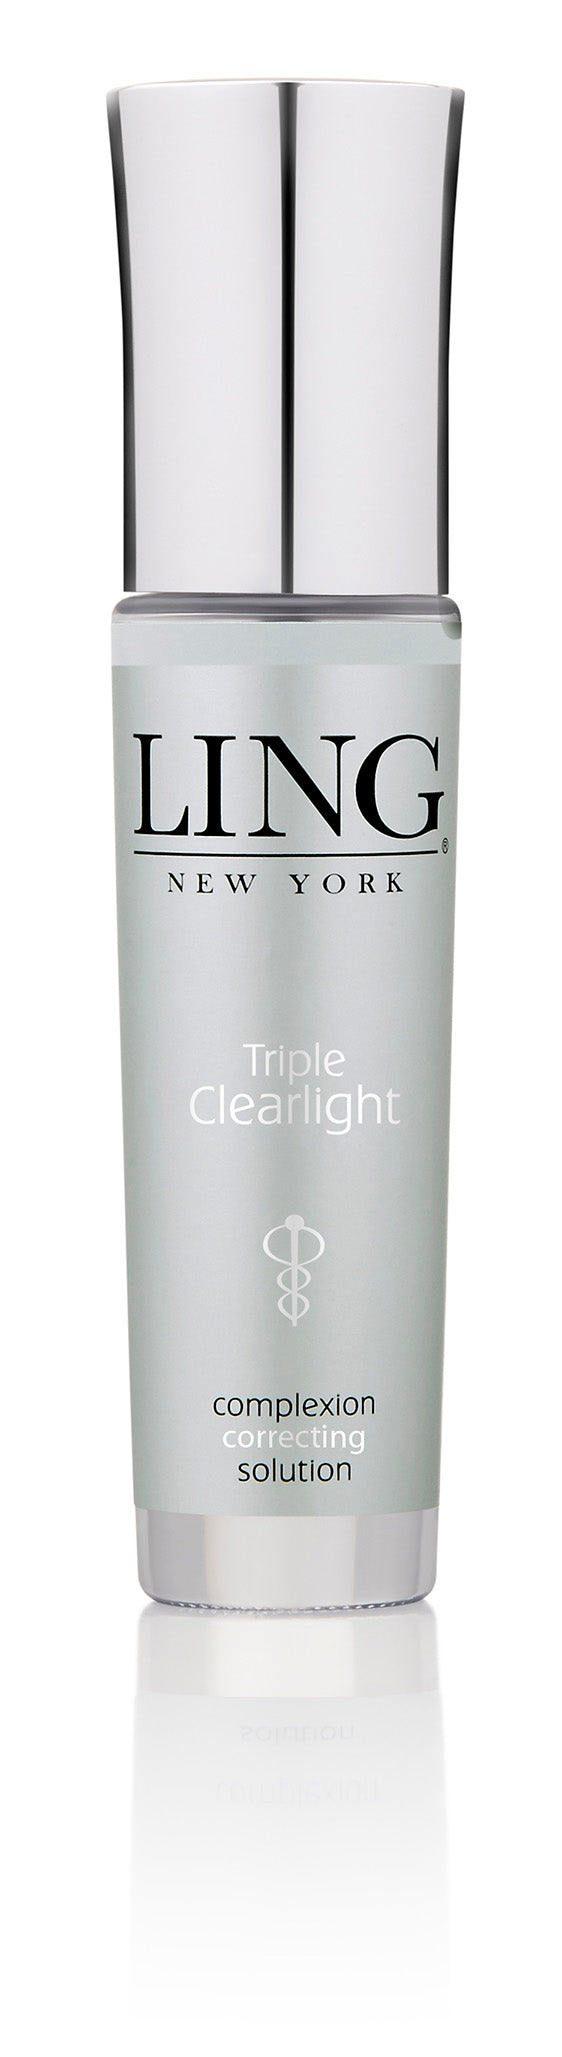 Triple Clearlight Complexion Correcting Solution